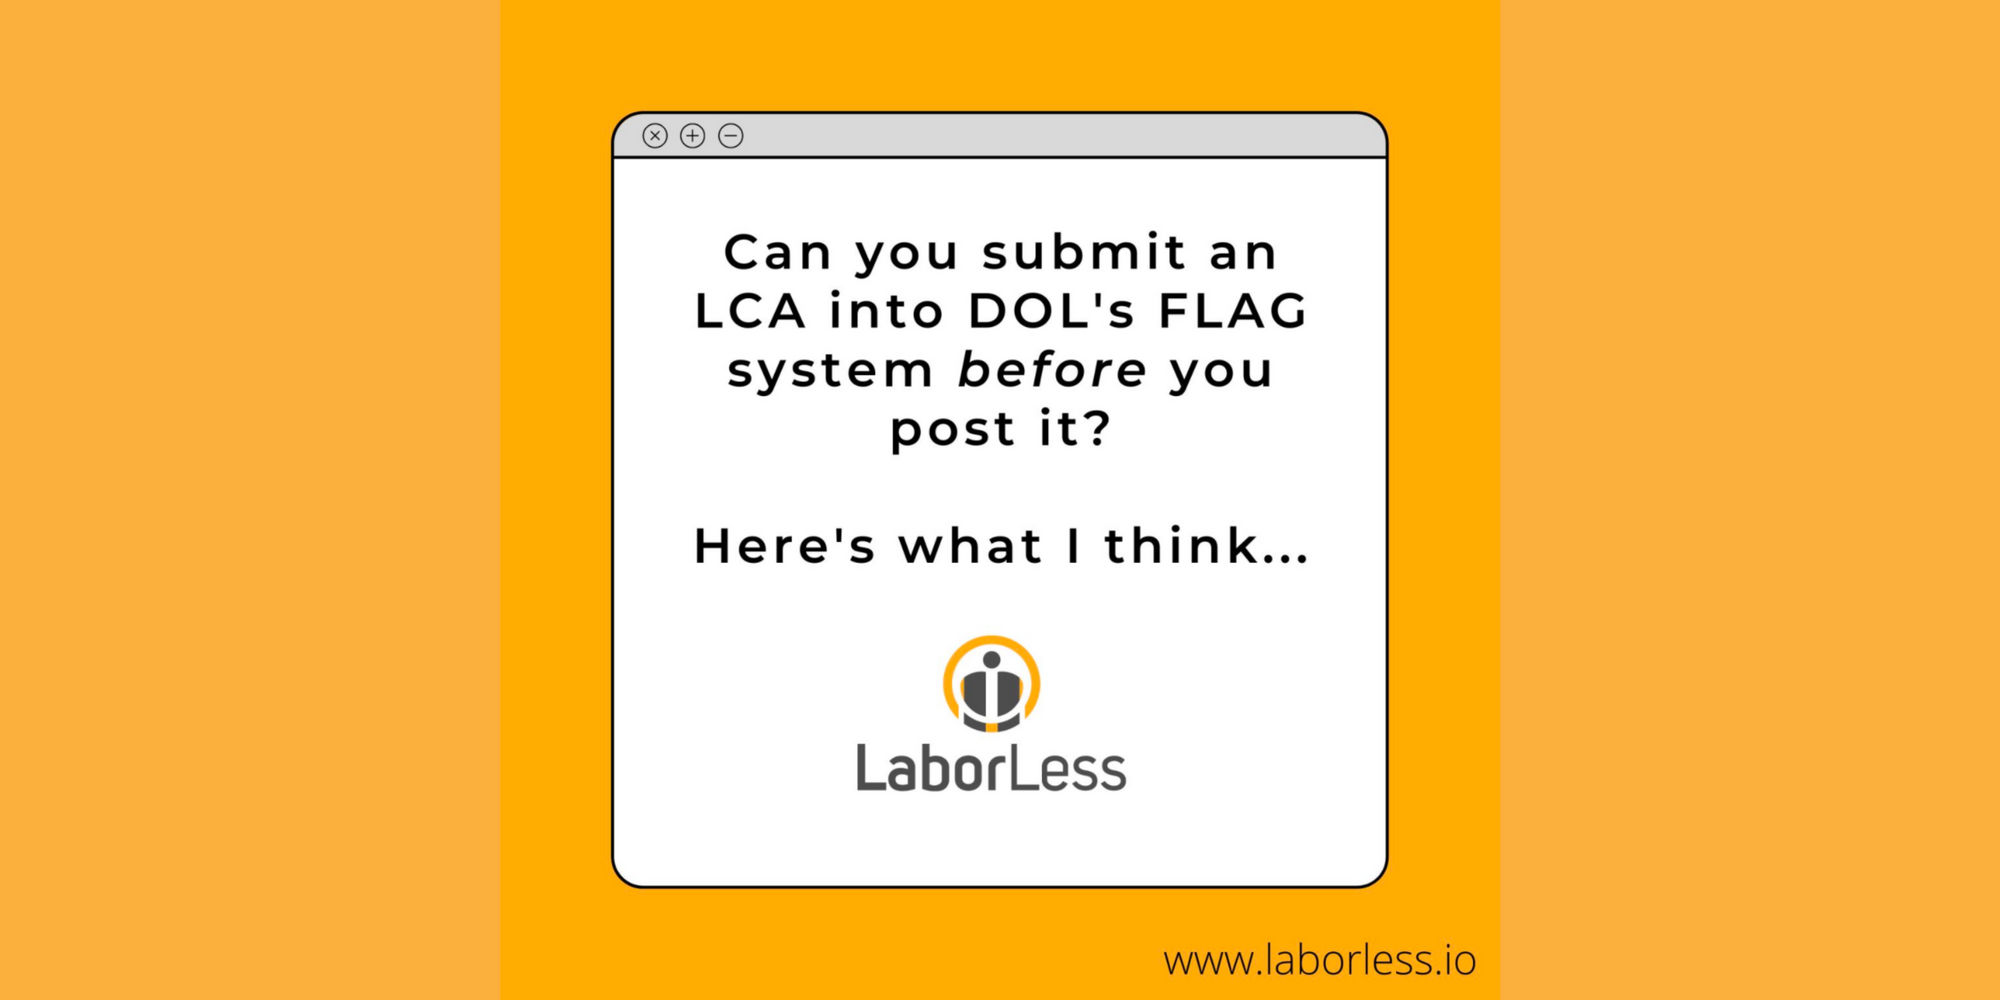 Electronic LCA Posting Enables Law Firms to File LCAs And Post Them Too